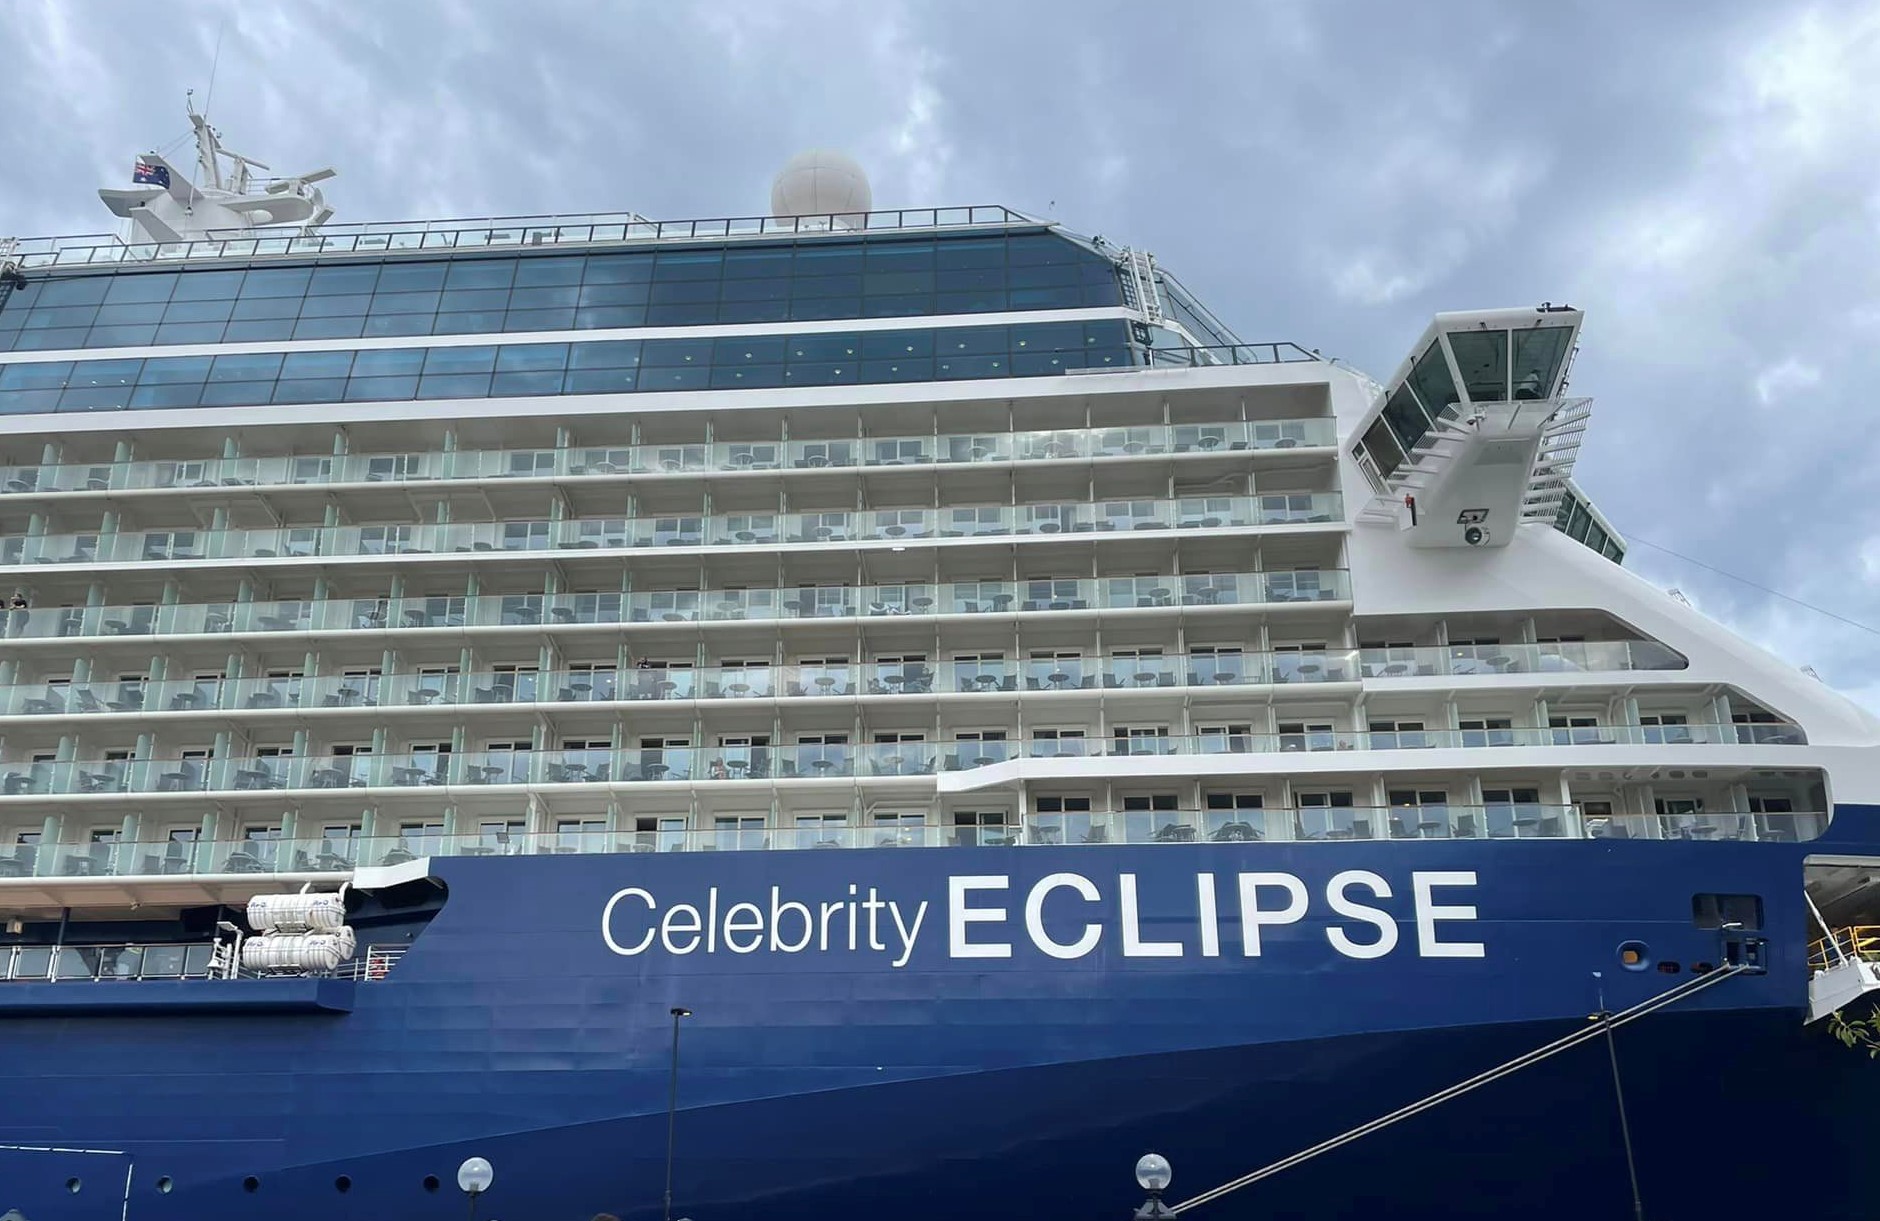 Celebrity Eclipse is the first cruise ship to offer Starlink service